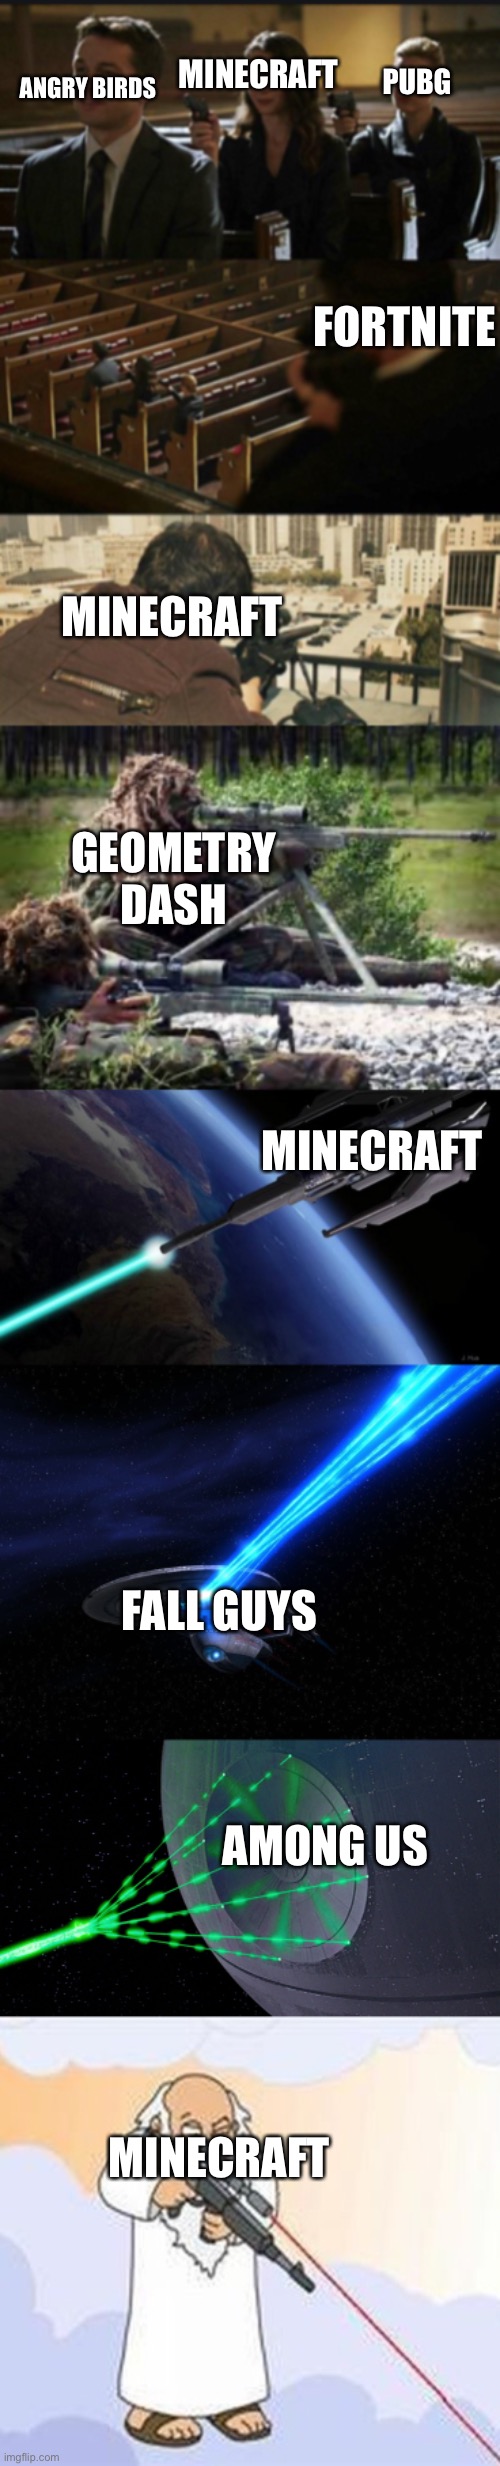 That’s a lot of Assassins | MINECRAFT; PUBG; ANGRY BIRDS; FORTNITE; MINECRAFT; GEOMETRY DASH; MINECRAFT; FALL GUYS; AMONG US; MINECRAFT | image tagged in minecraft,pubg,fortnite,angry birds,among us,geometry dash | made w/ Imgflip meme maker